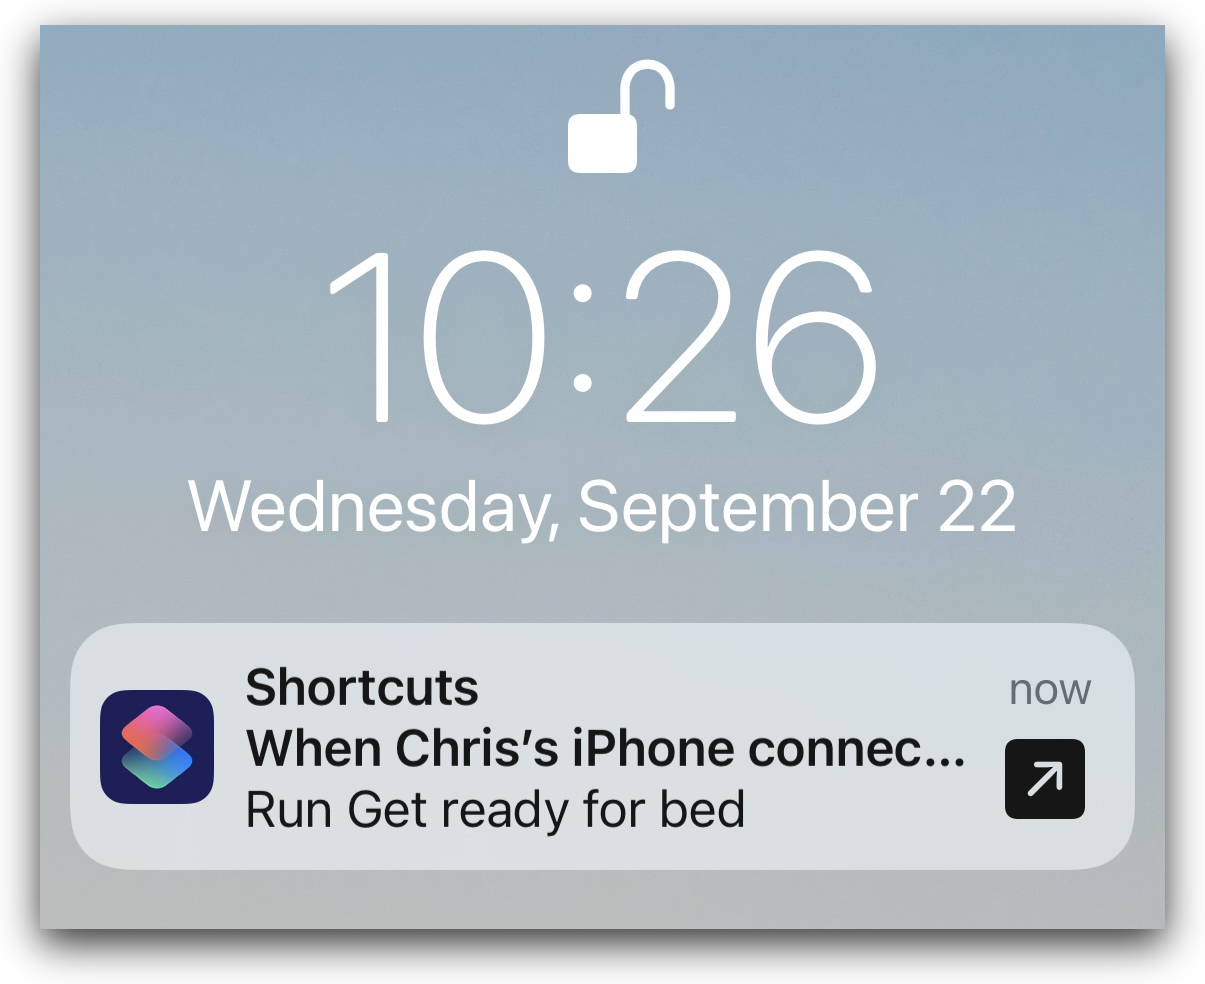 Shortcuts notification delivered outside of focus mode